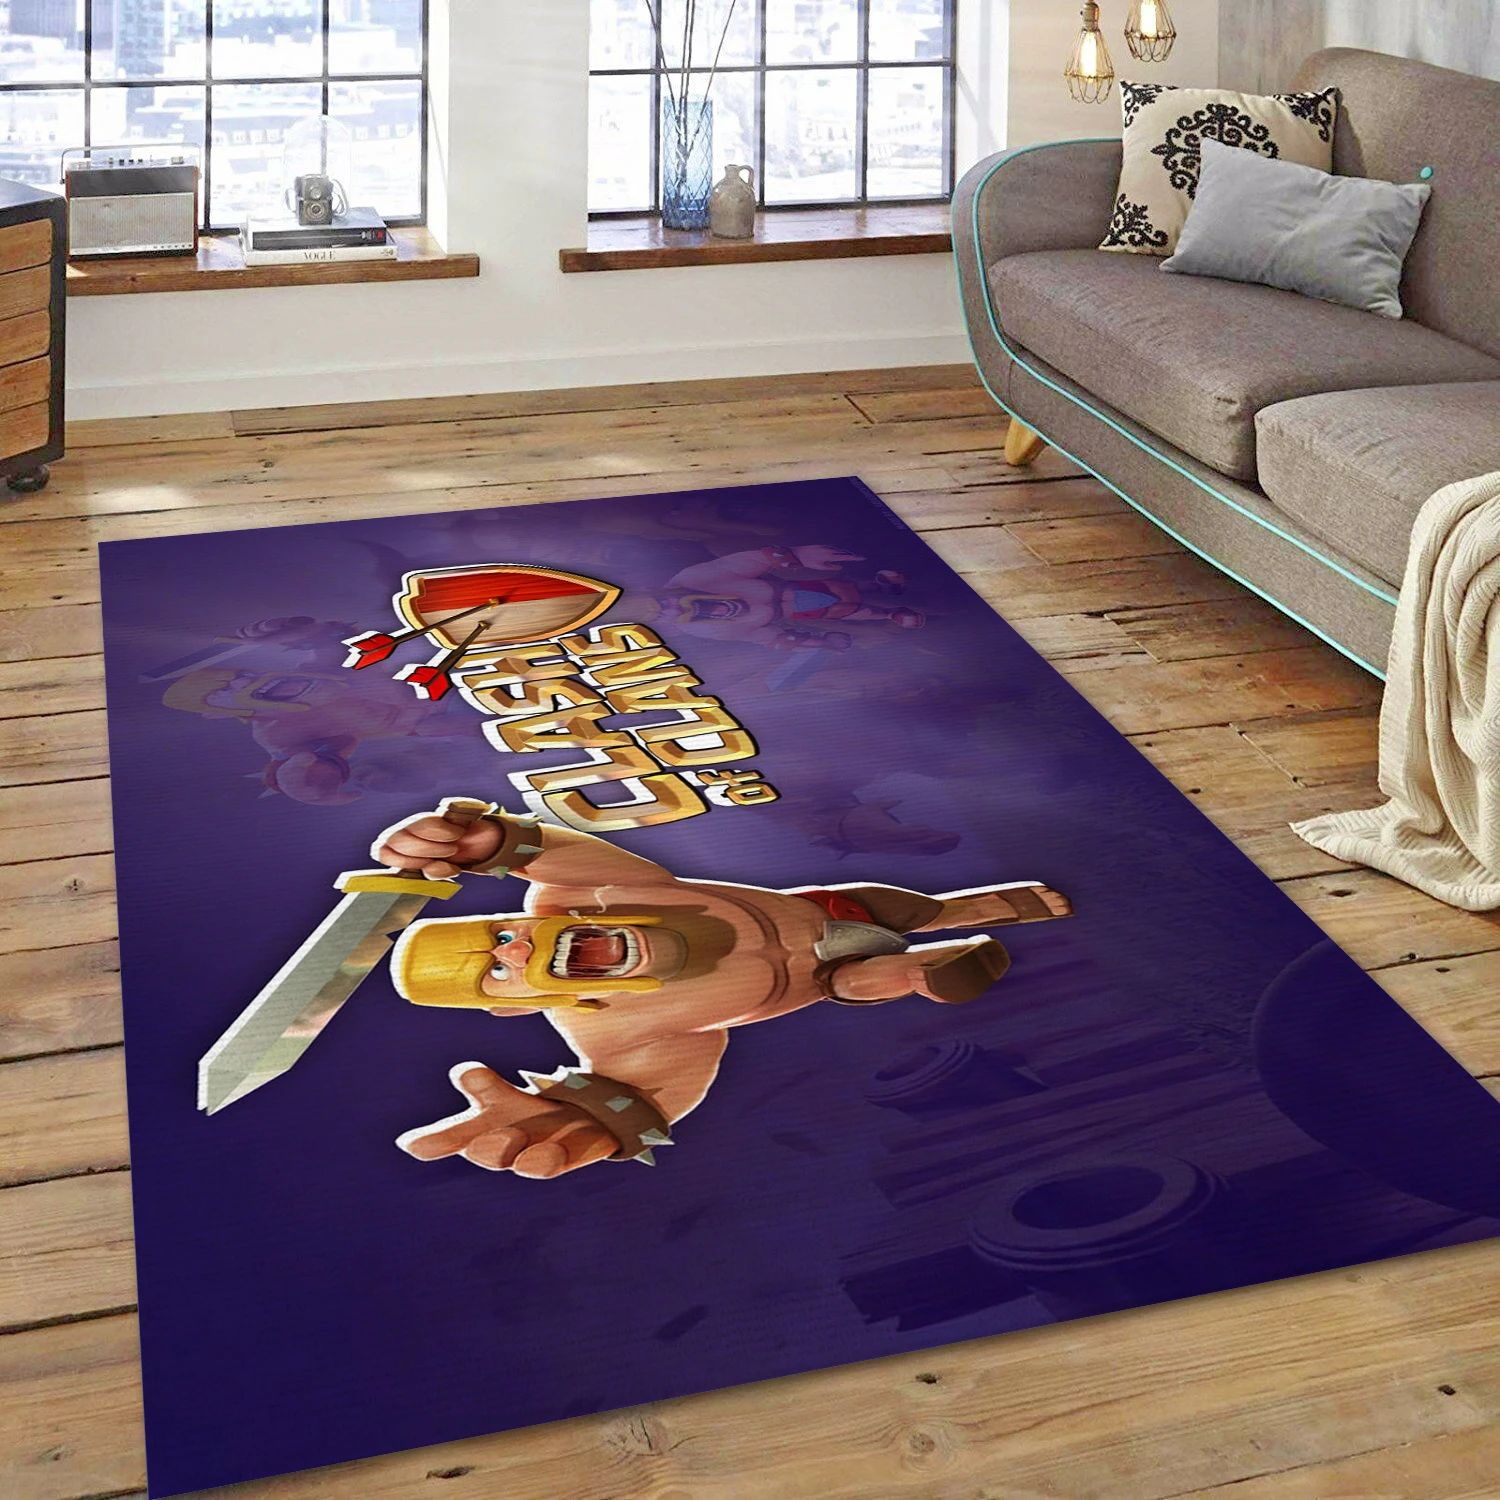 Clash Of Clans Video Game Area Rug Area